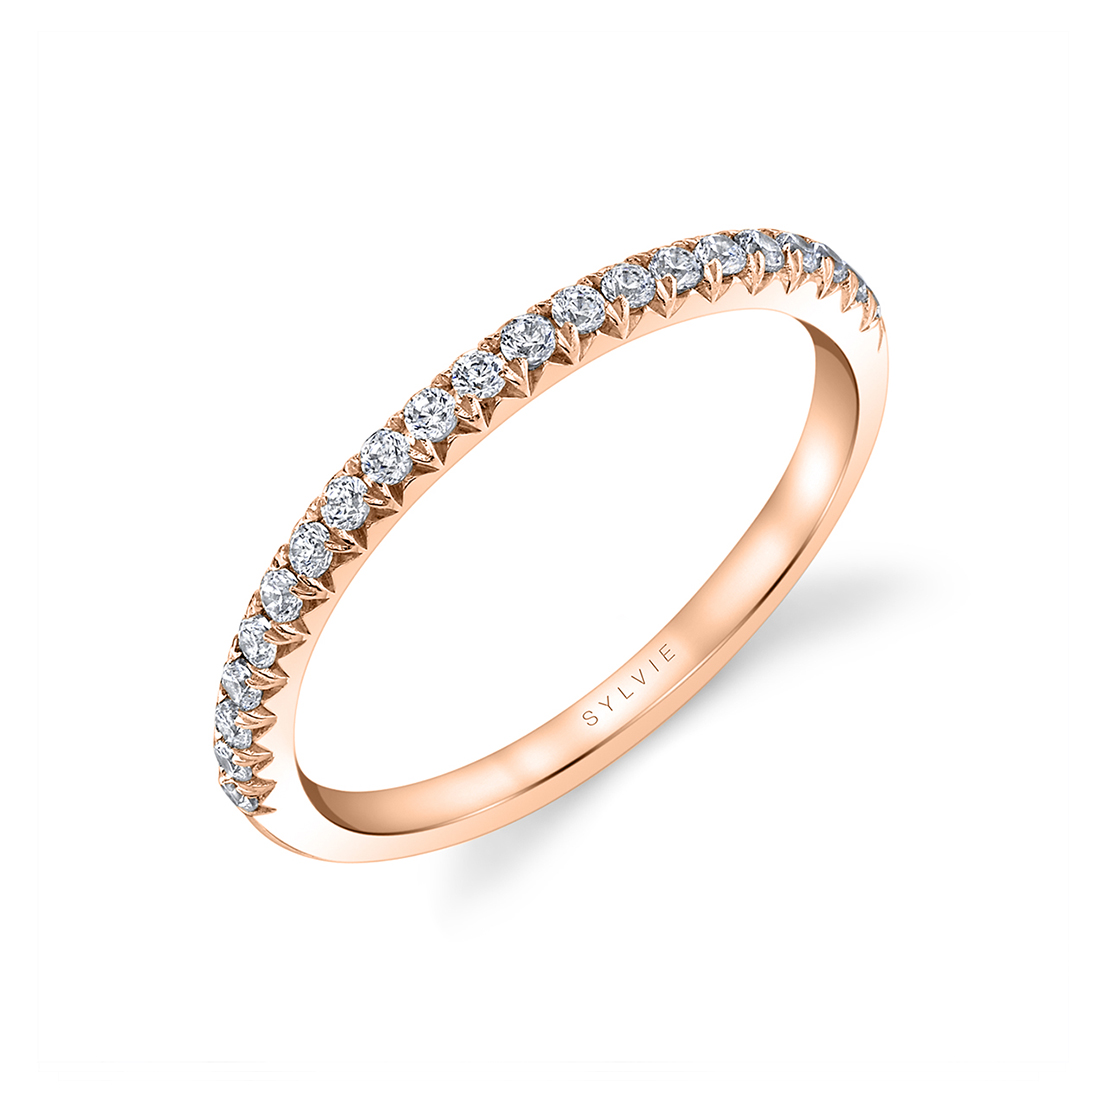 Fishtail Wedding Band in Rose Gold